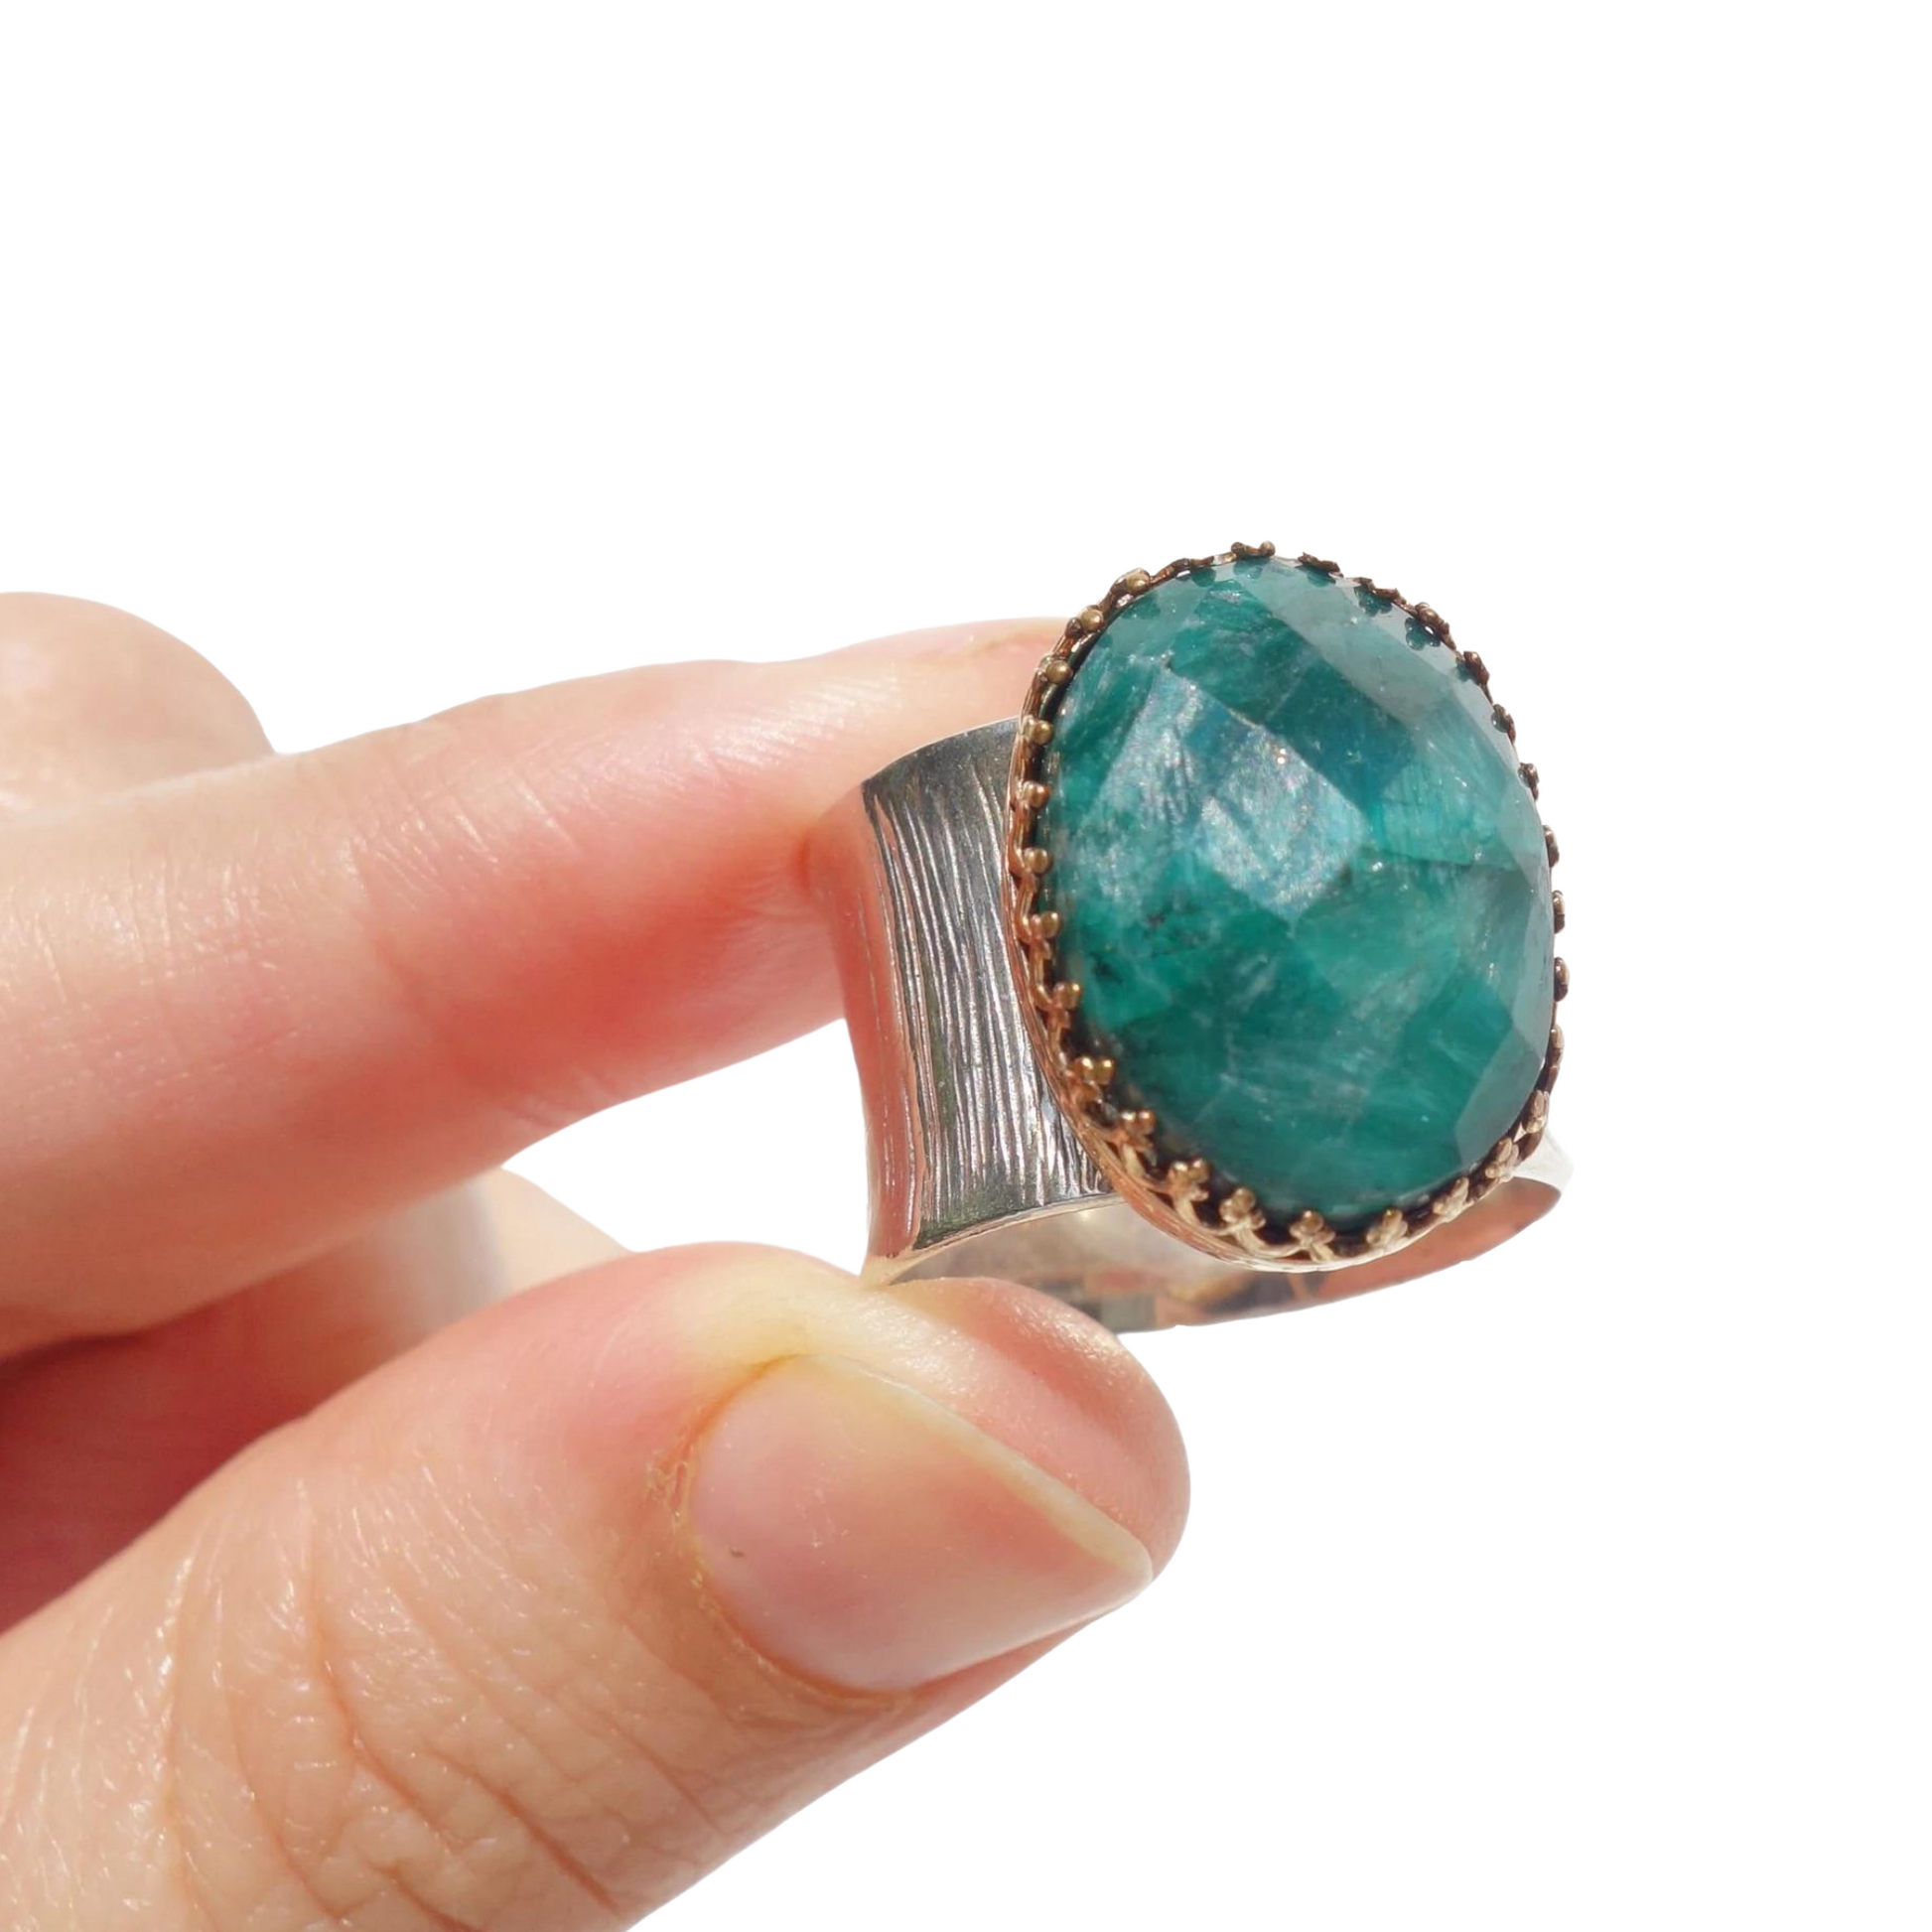 Emerald Leaf Ring - Gardens of the Sun | Ethical Jewelry